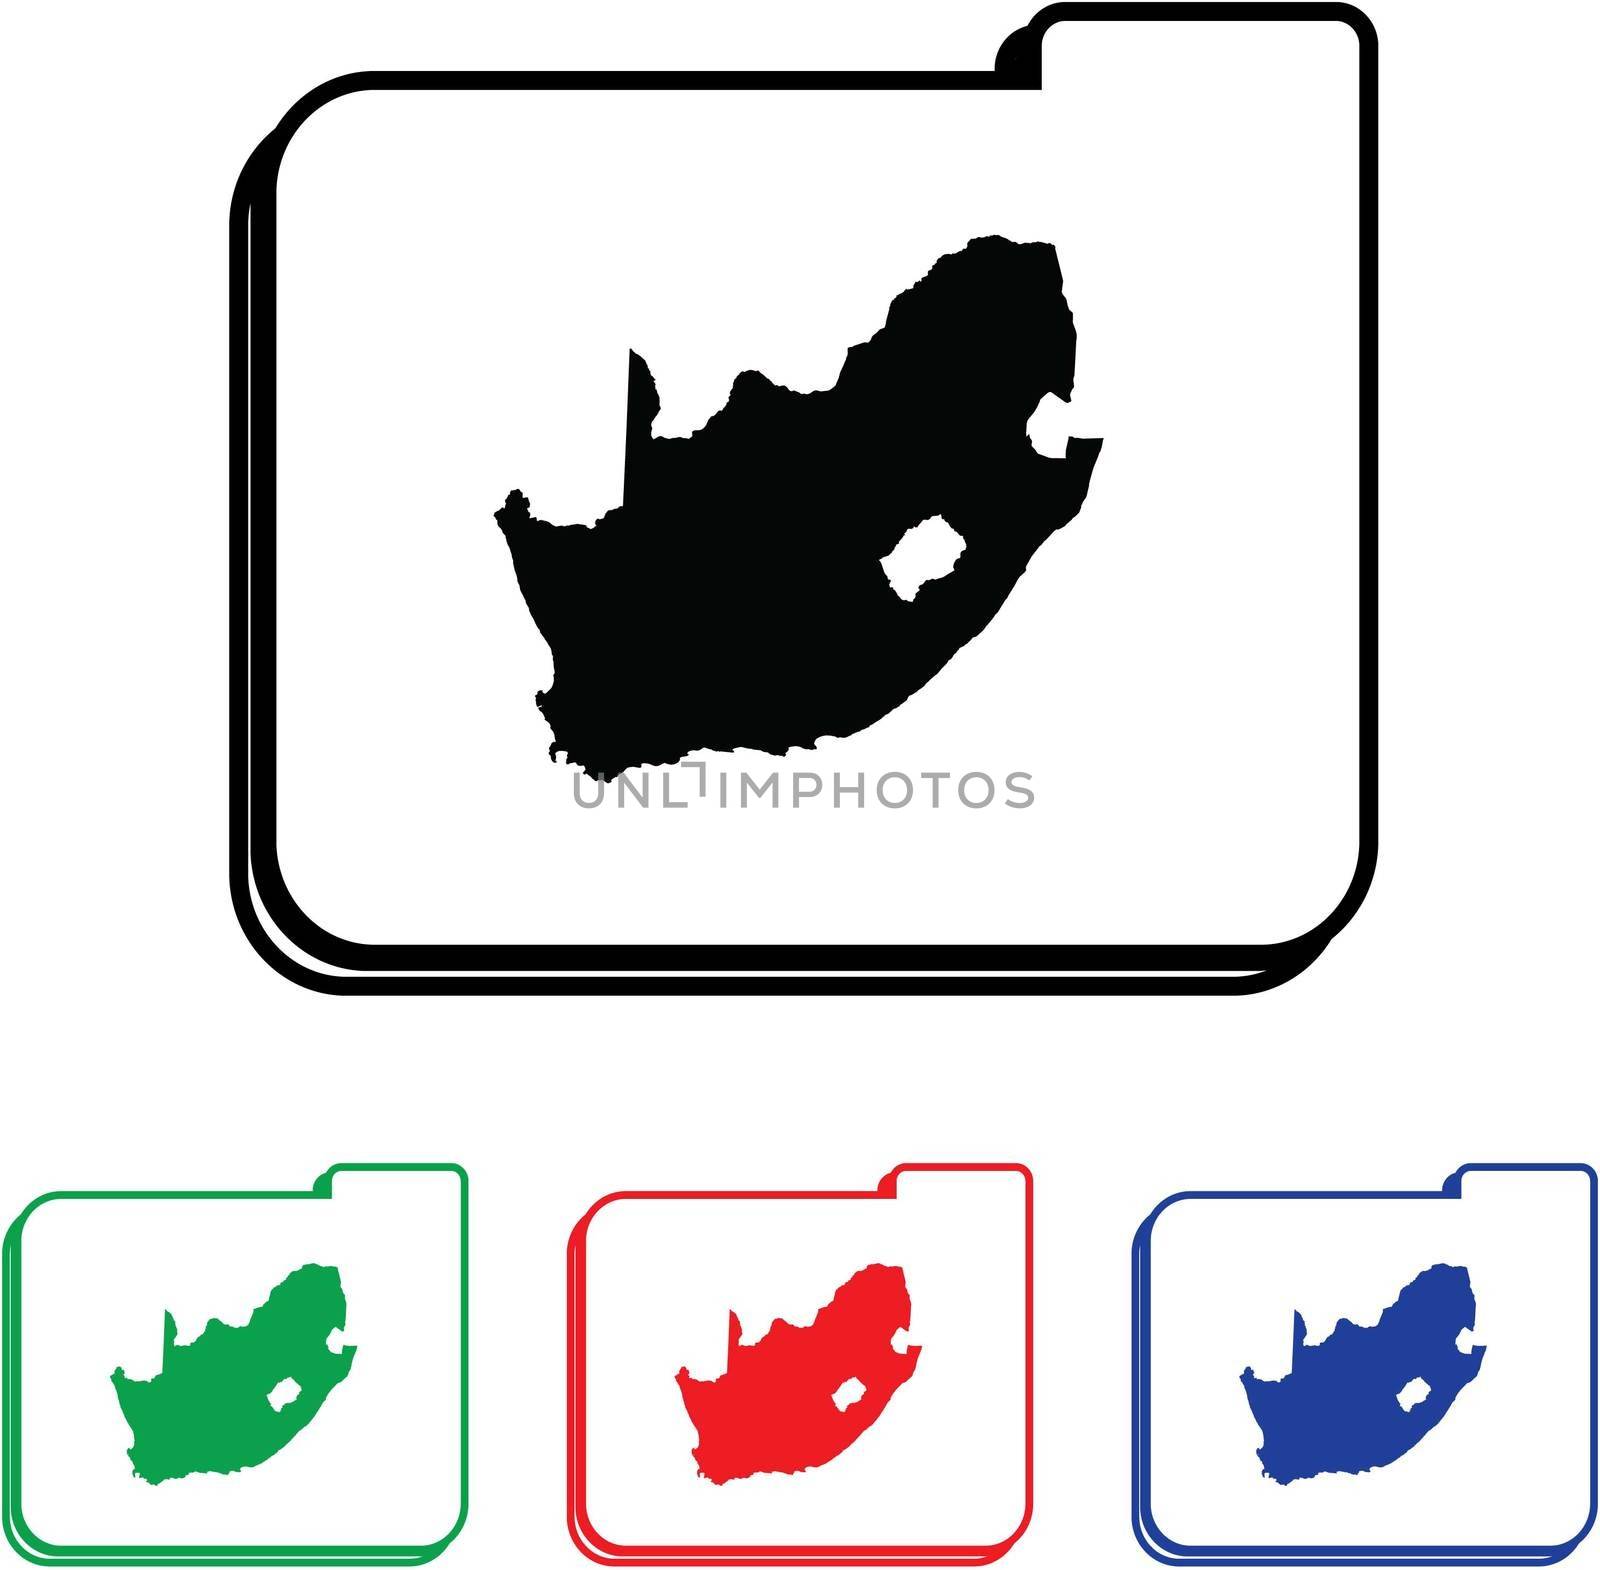 South Africa Icon Illustration with Four Color Variations